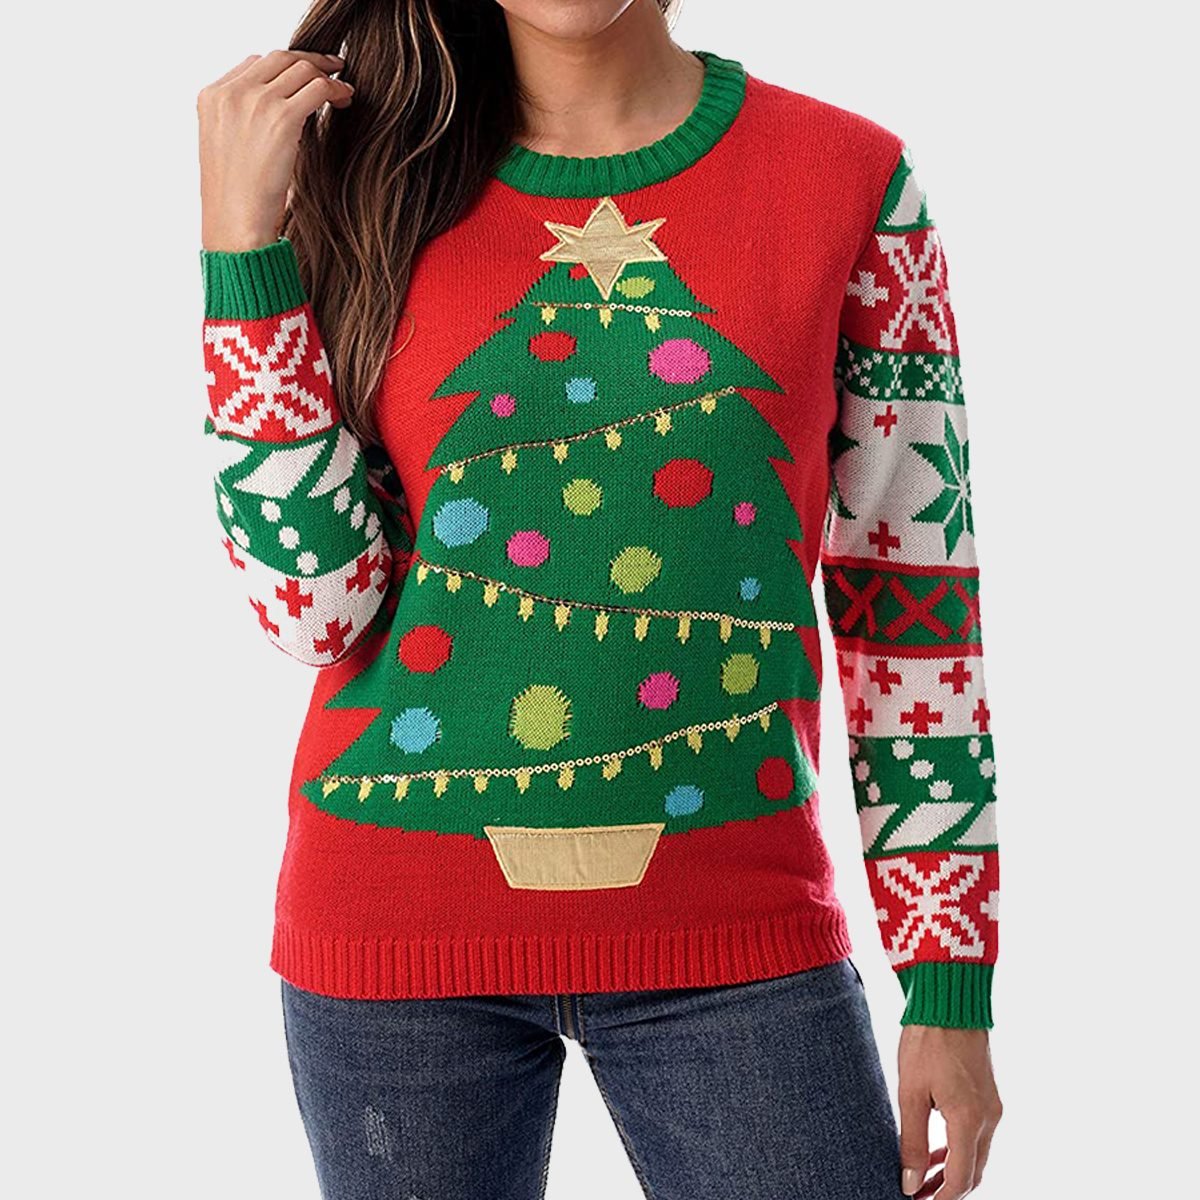 28 Best Ugly Christmas Sweaters 2021 | Sweaters for Women and Men